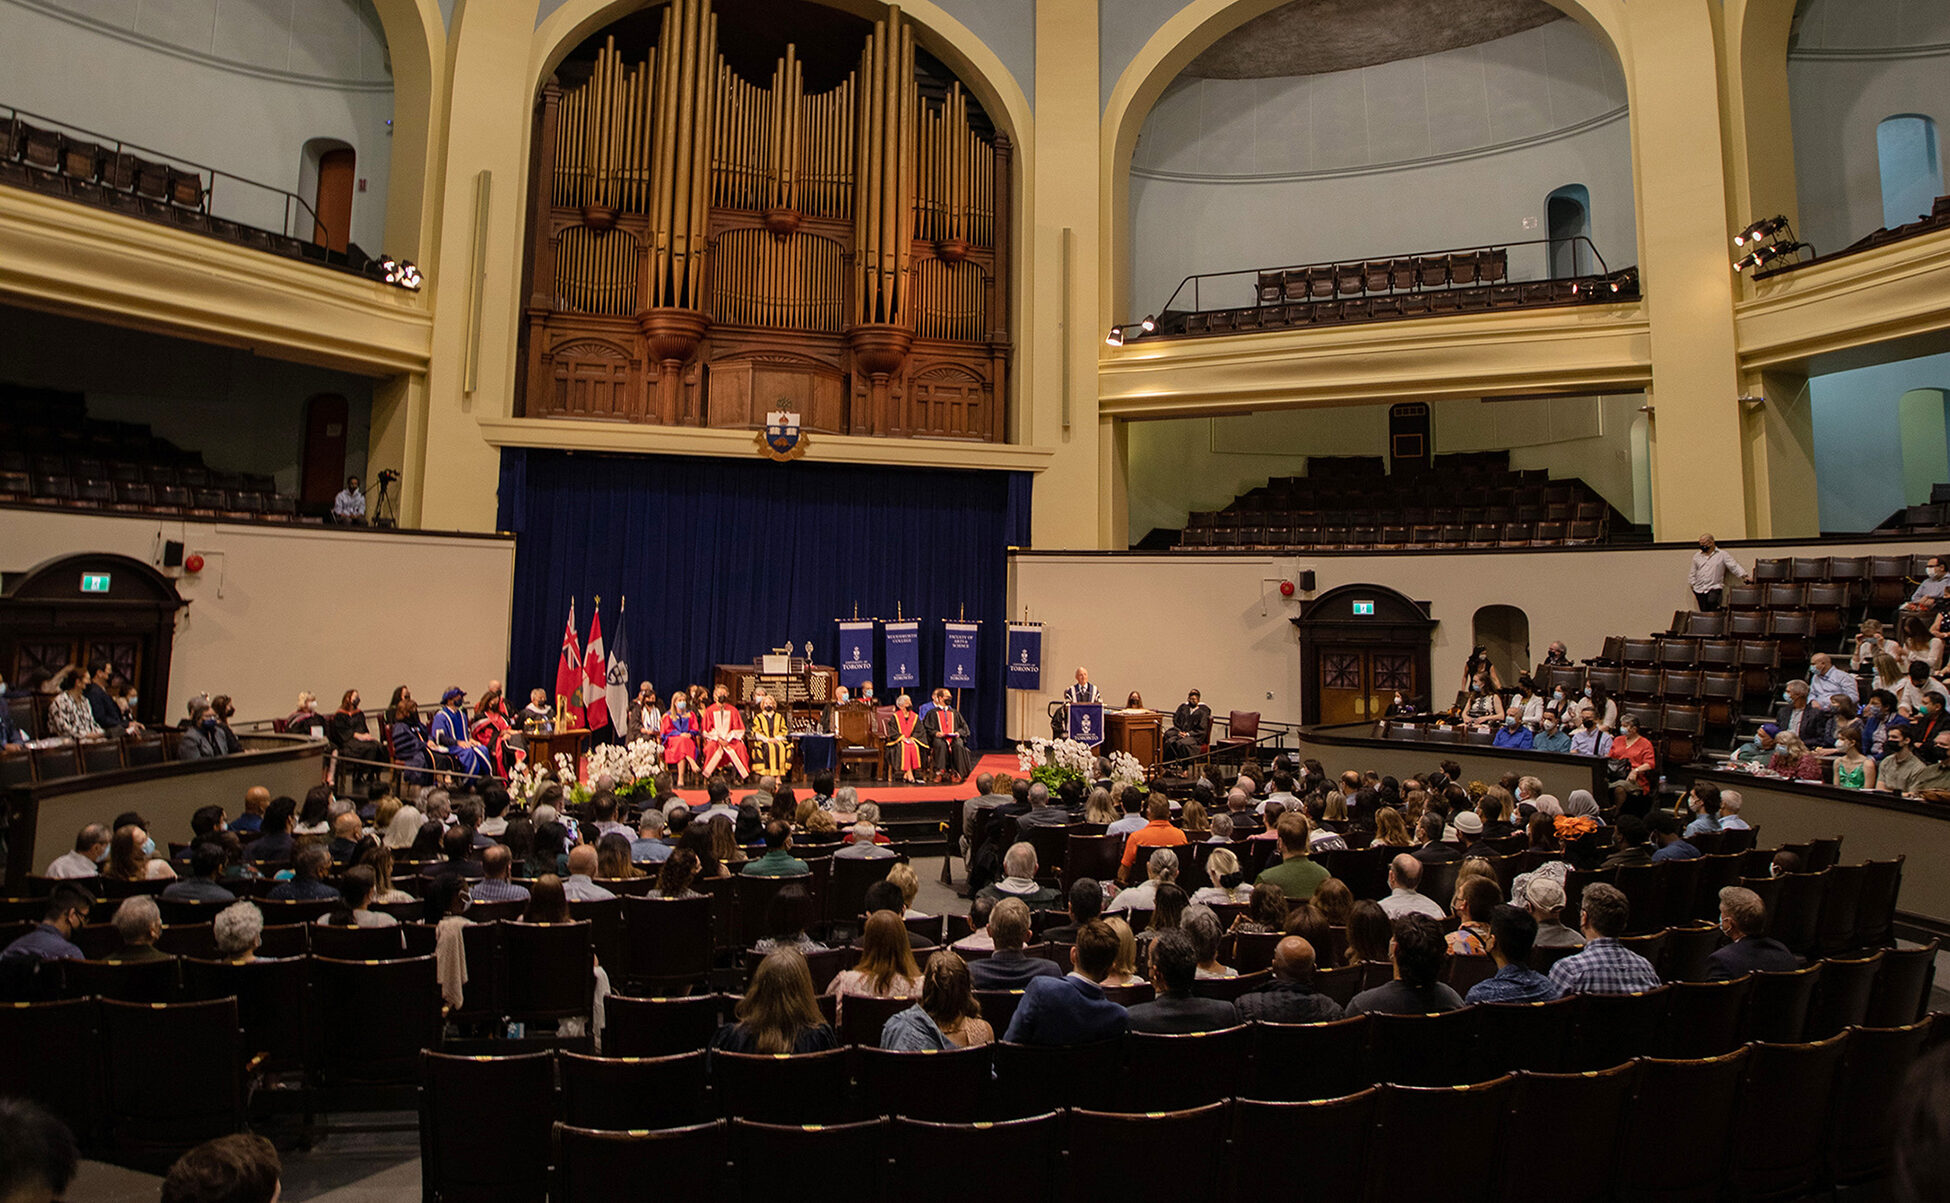 Graduation ceremony taking place in Convocation Hall